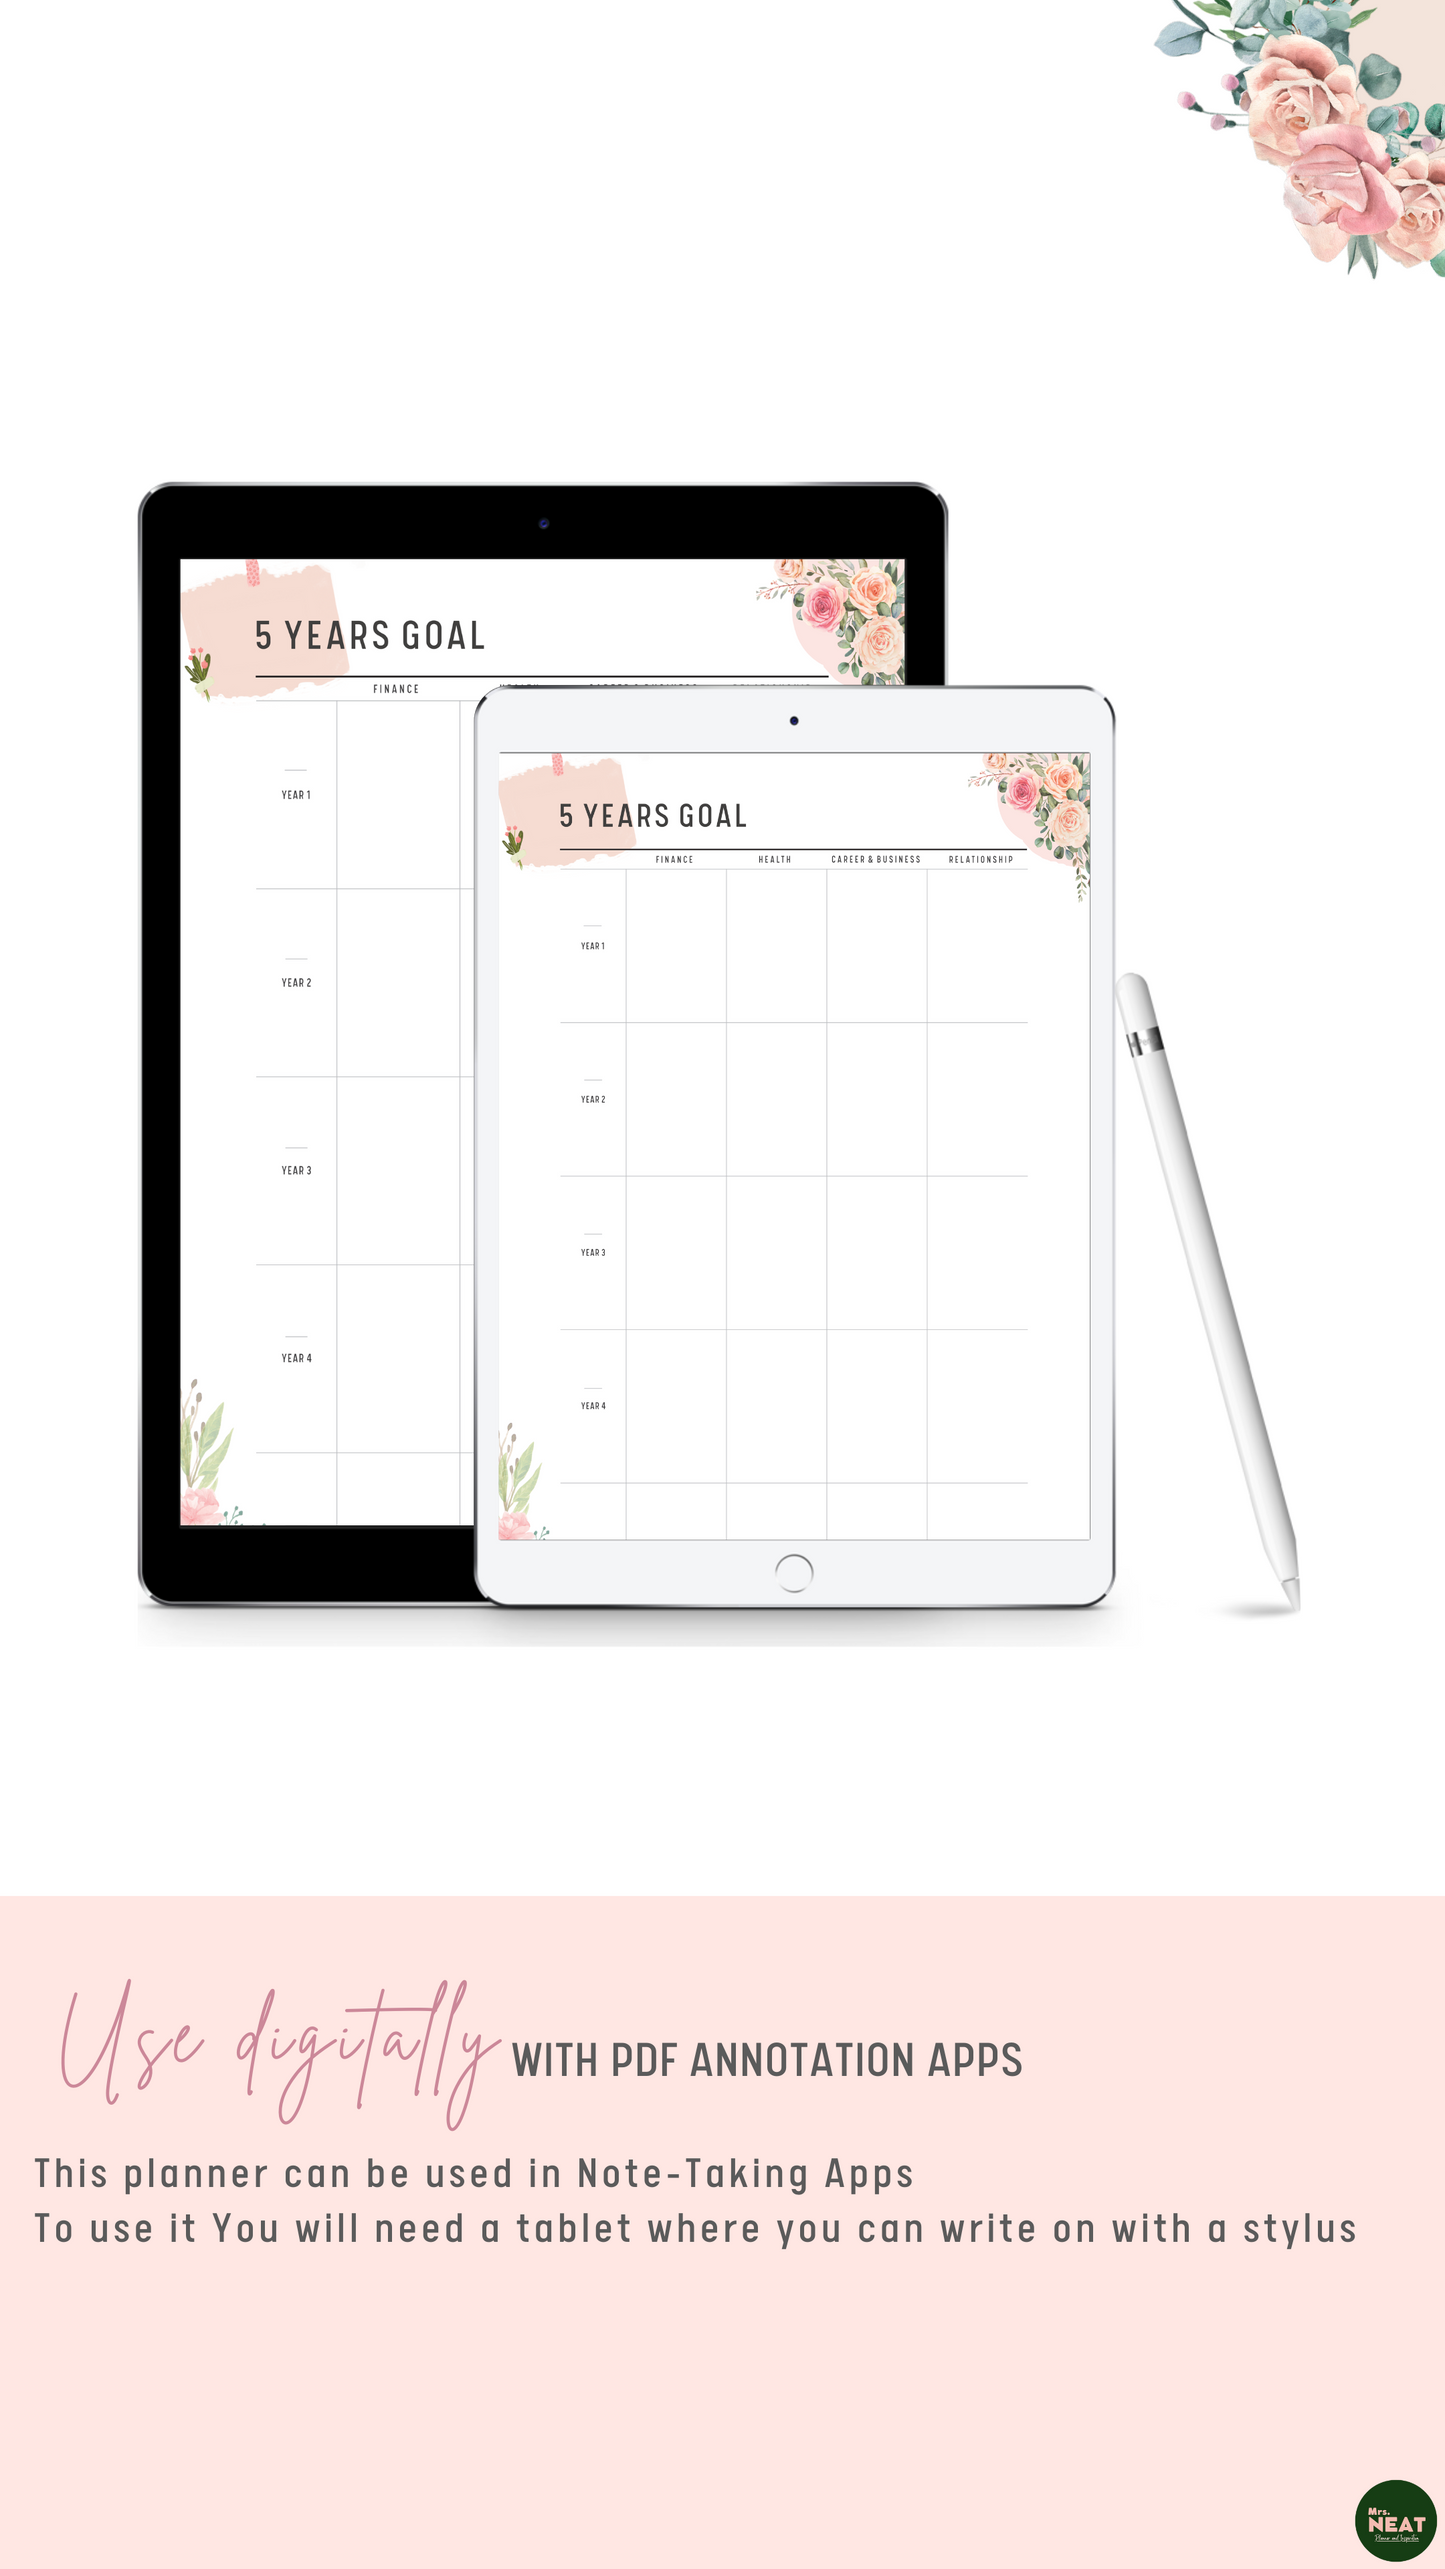 Beautiful Floral 5 Year Goal Planner use digitally with Tablet and Stylus